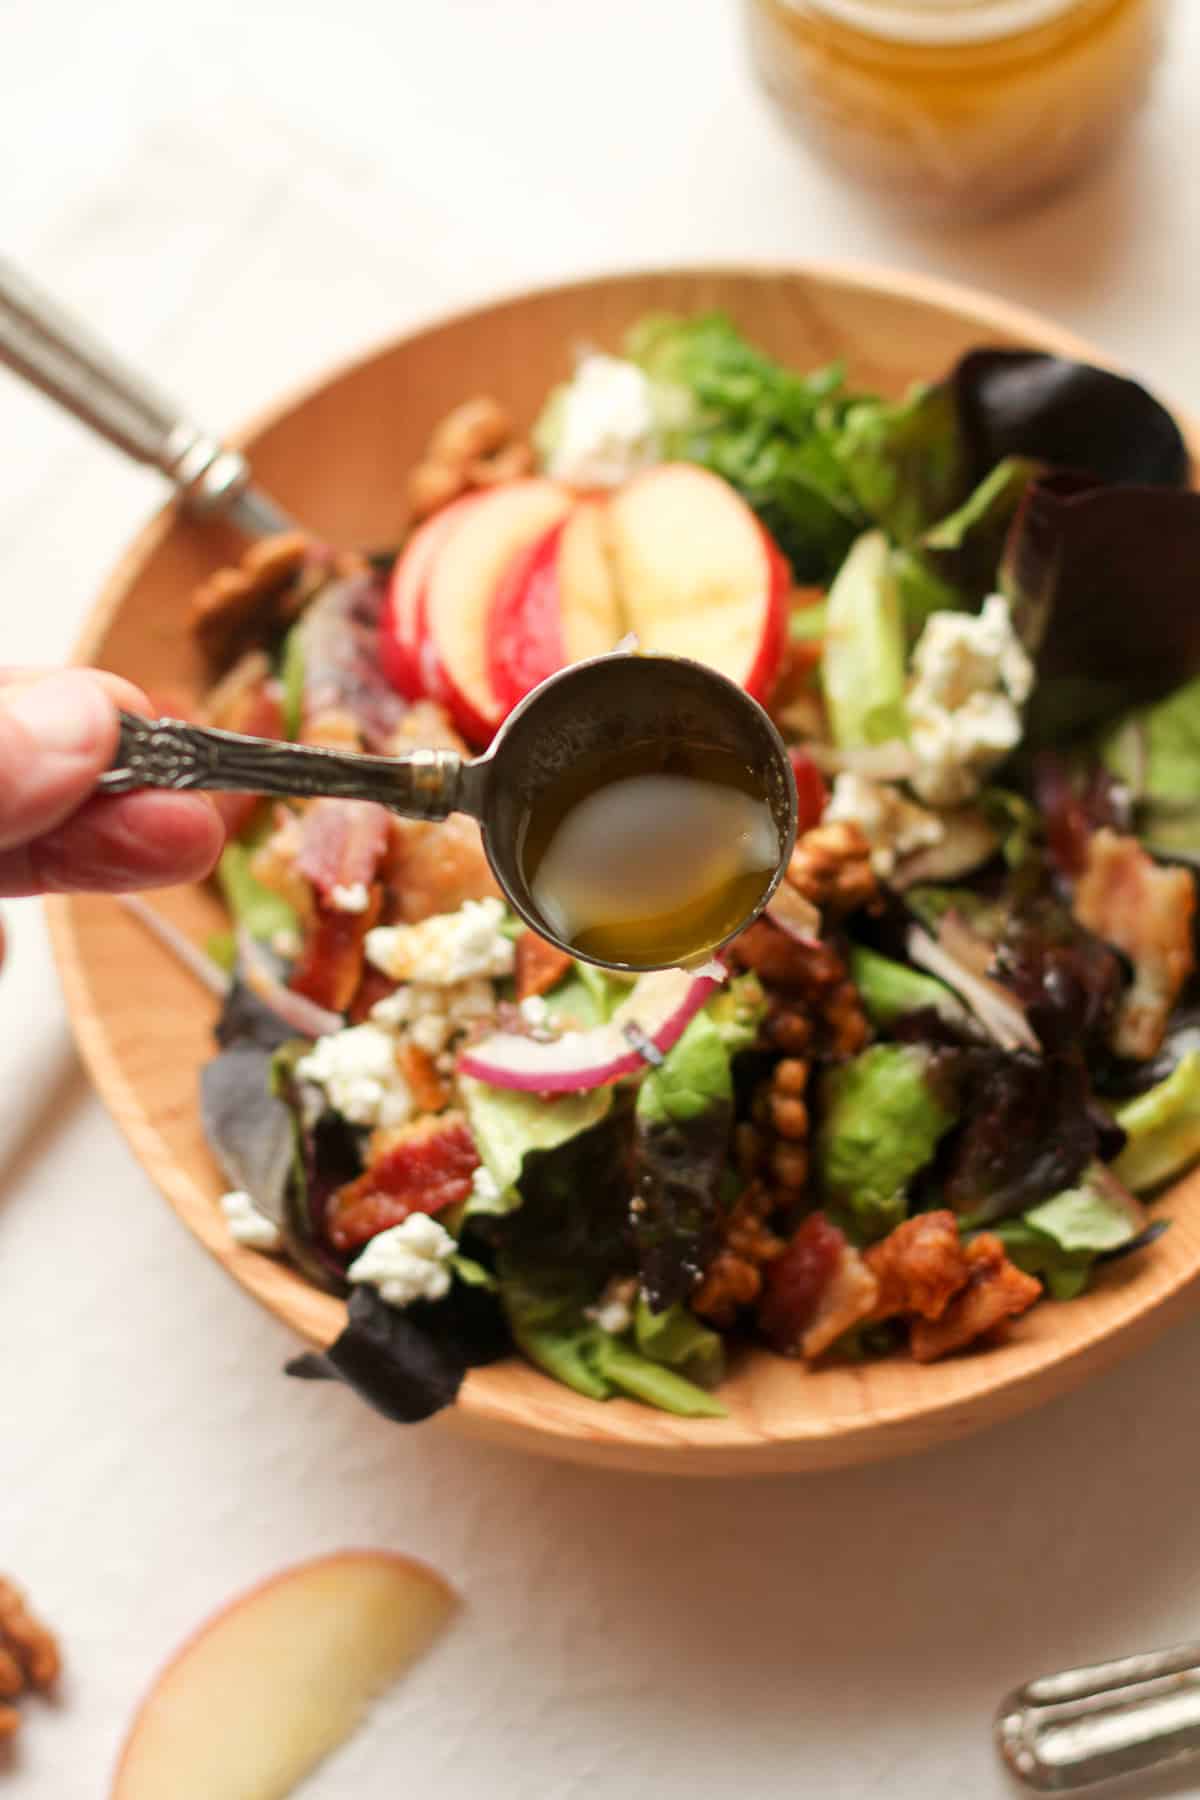 Overhead view of a spoonful of balsamic honey dressing over a serving of the harvest salad.